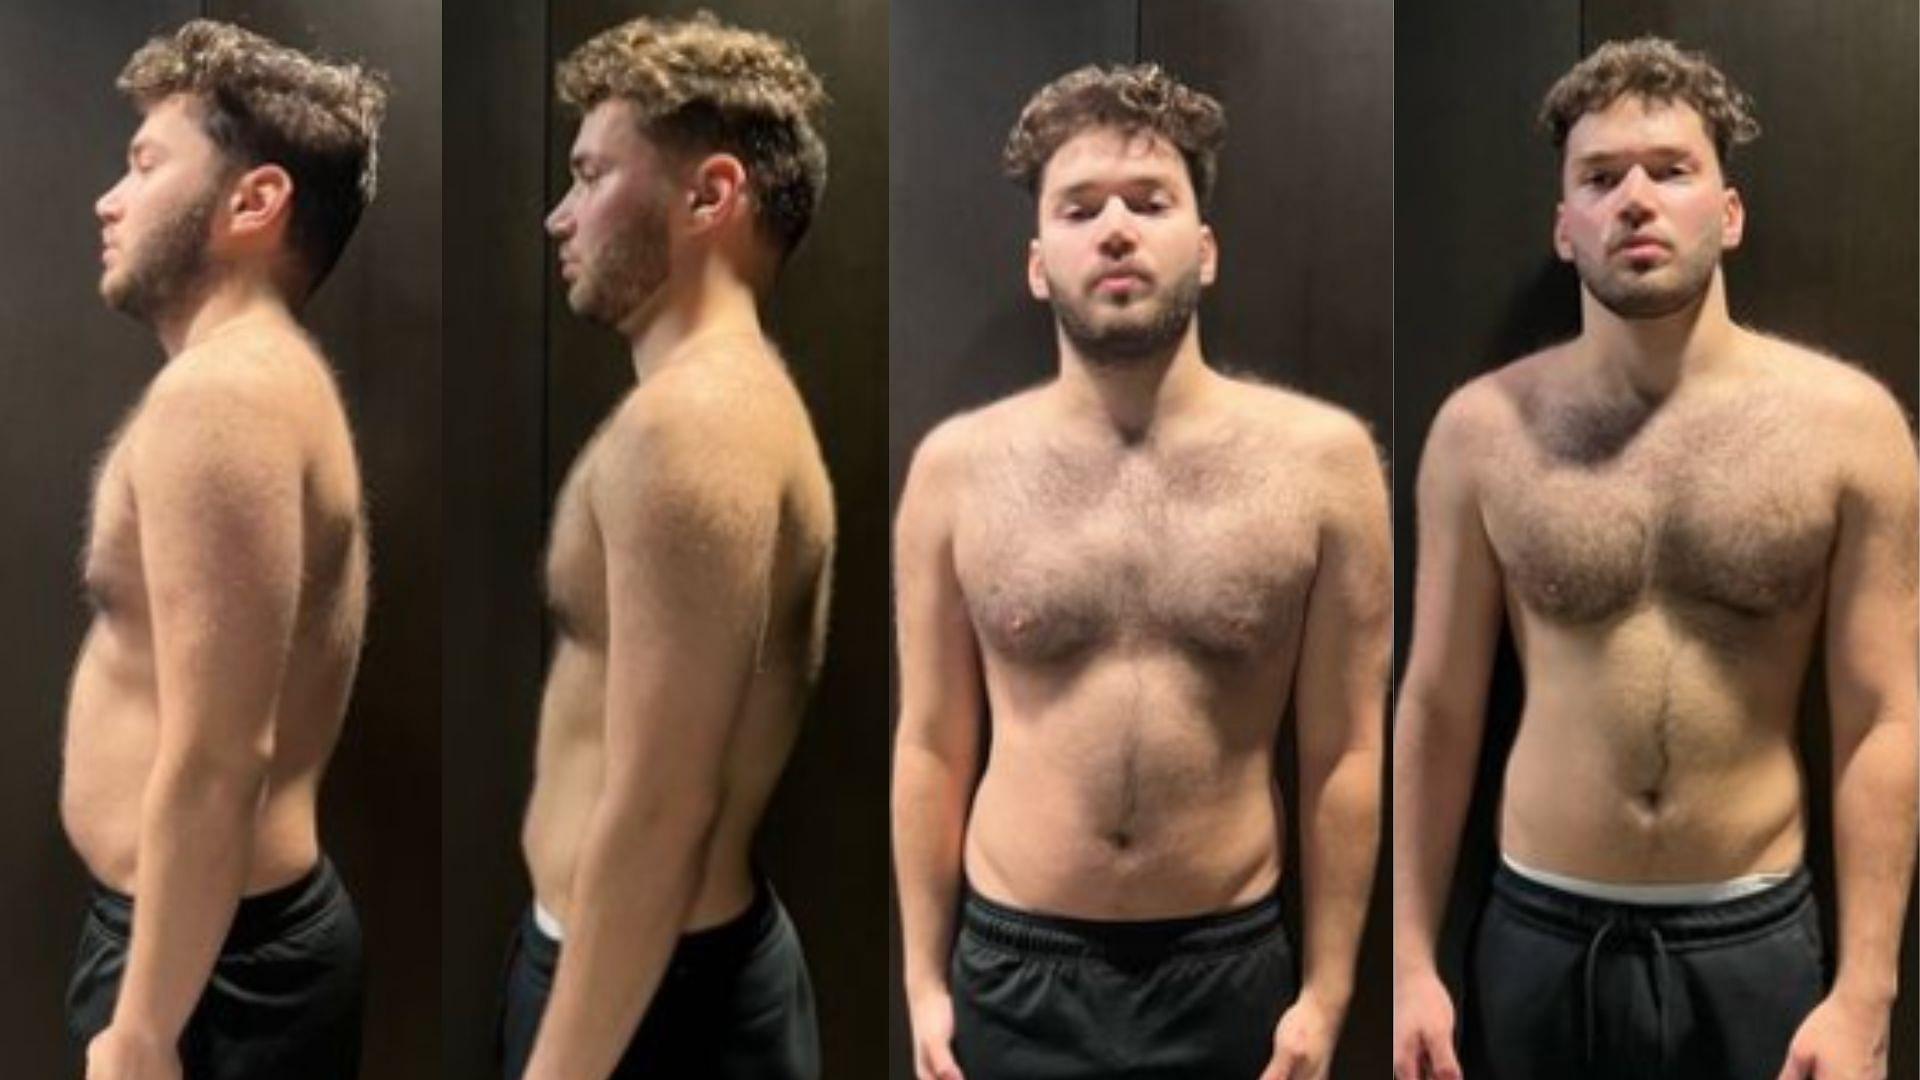 Adin Ross shows off his body 1 month transformation